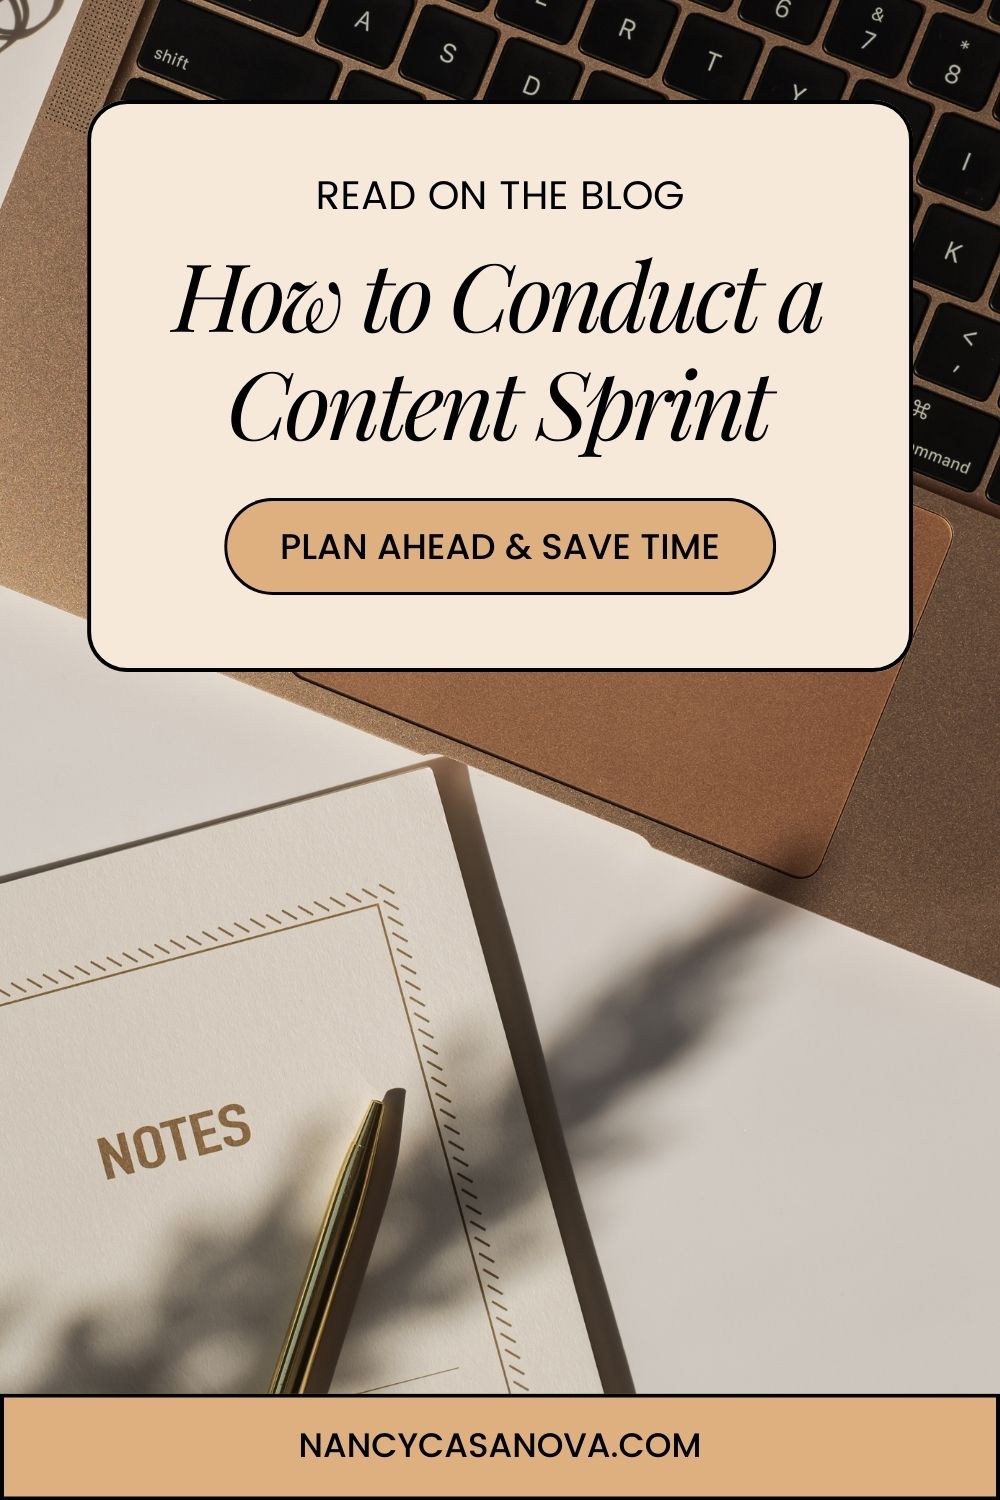 Content sprints are a dynamic approach to content creation and allow you to dedicate a focused and intensive period of time to creating content.